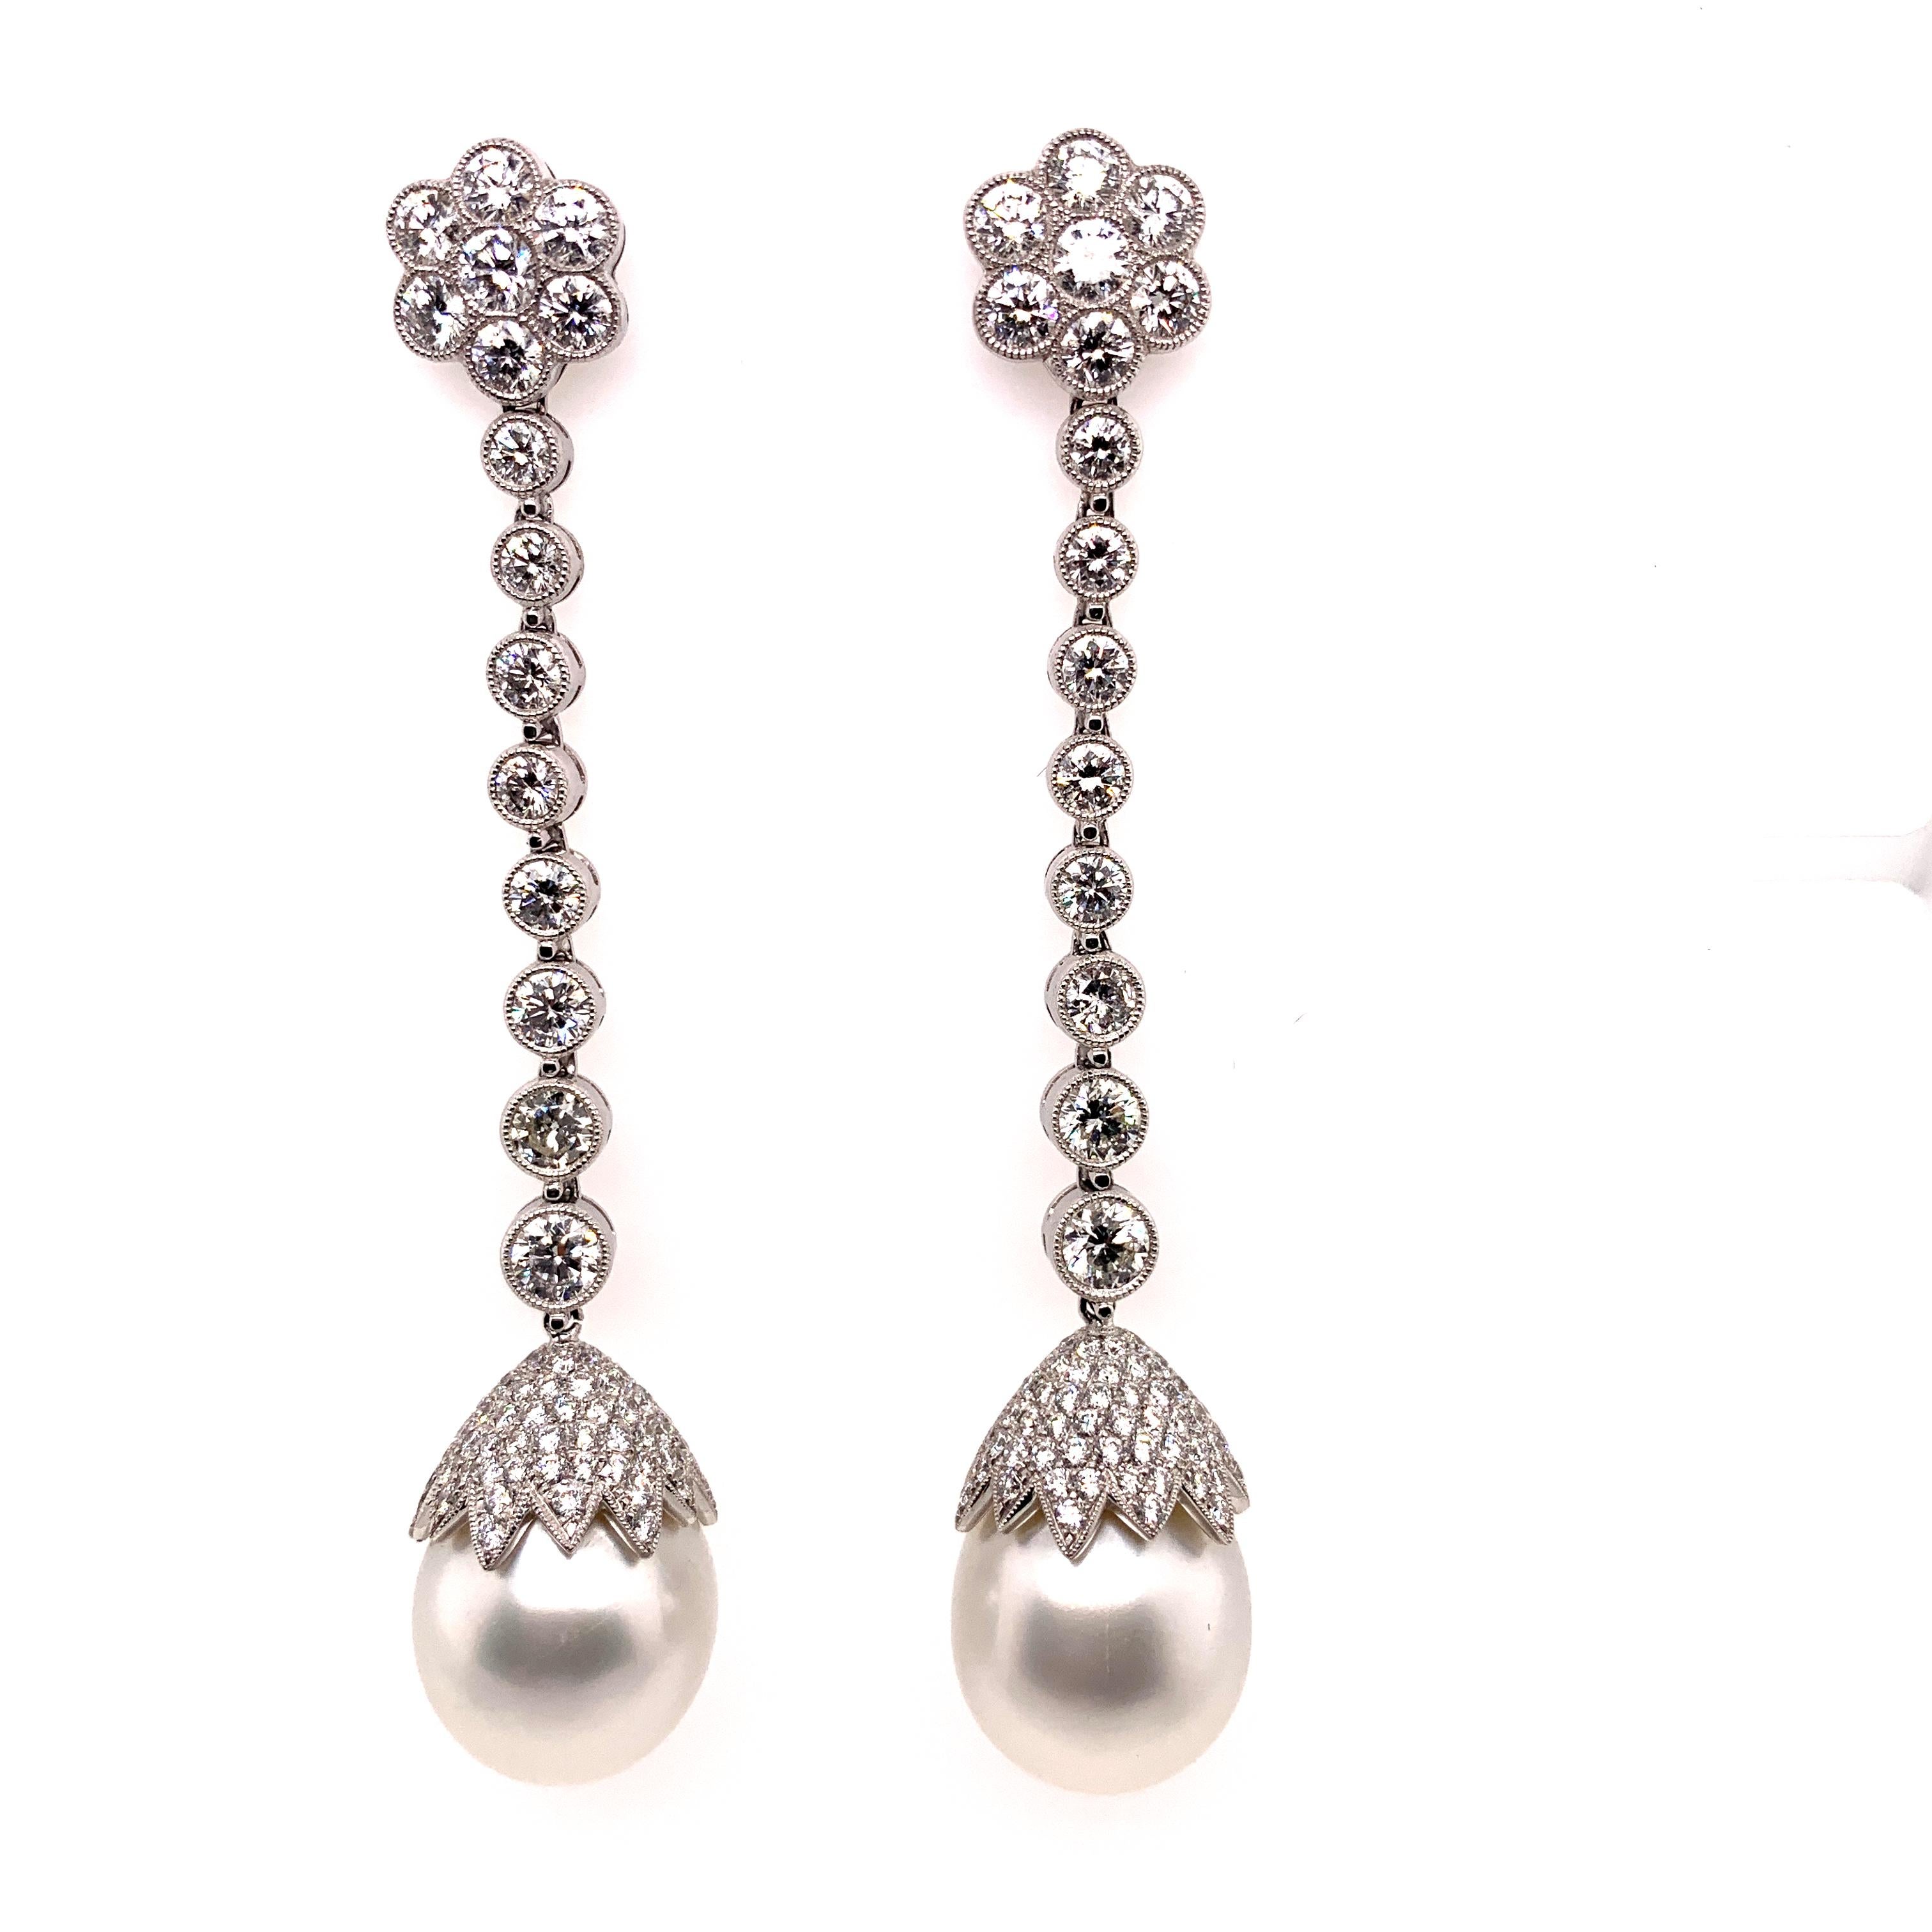 Drop earrings set in platinum with 4.27 carats of diamonds and white pearls.

Sophia D by Joseph Dardashti LTD has been known worldwide for 35 years and are inspired by classic Art Deco design that merges with modern manufacturing techniques.       